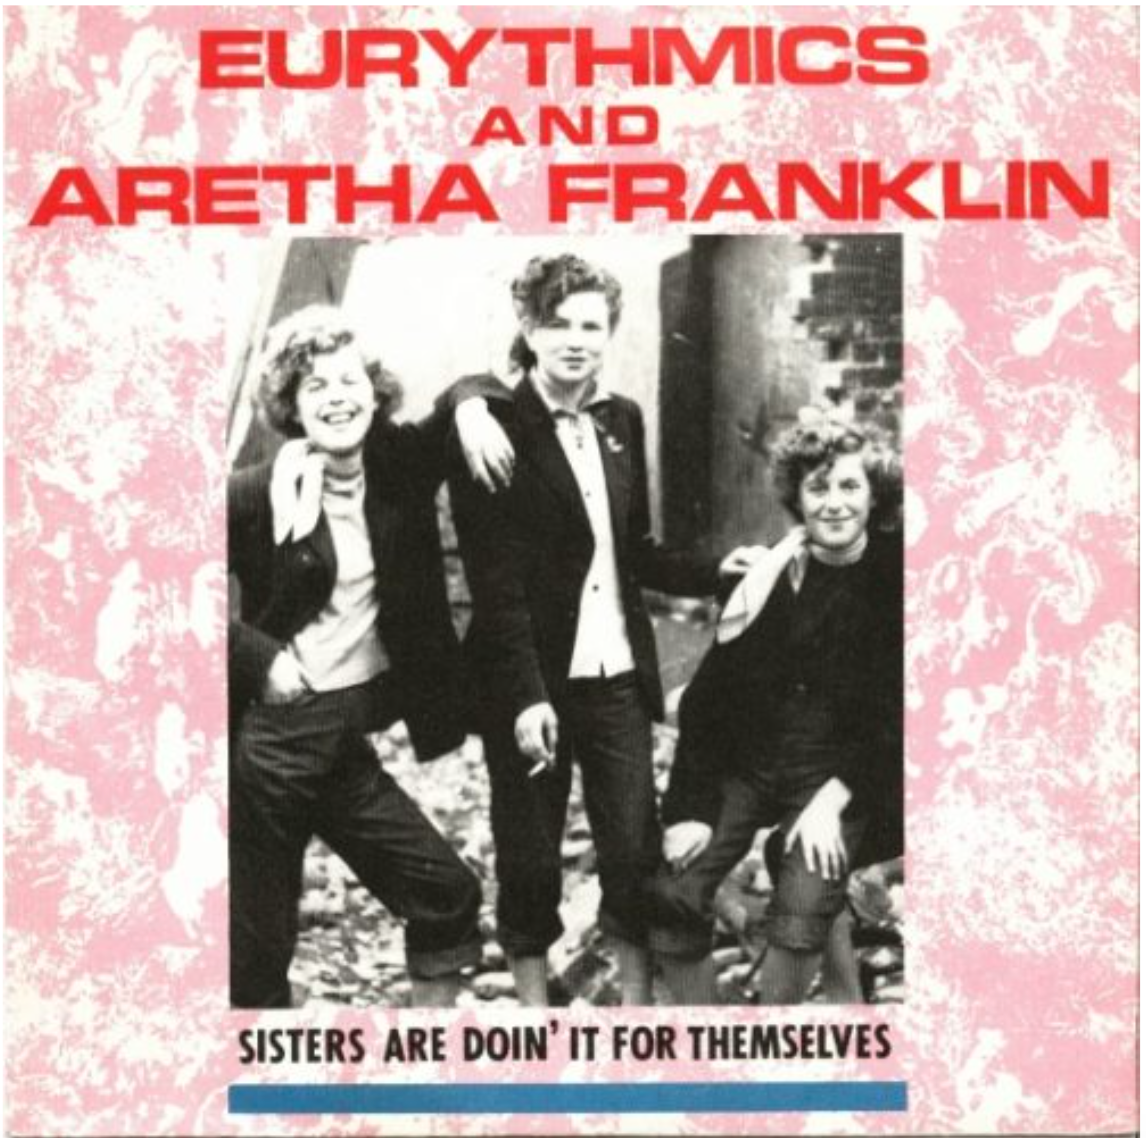 Above: Sisters Are Doin’ It For Themselves, recorded in 1985 by the British pop duo Eurythmics and American singer Aretha Franklin immediately became a feminist anthem. 